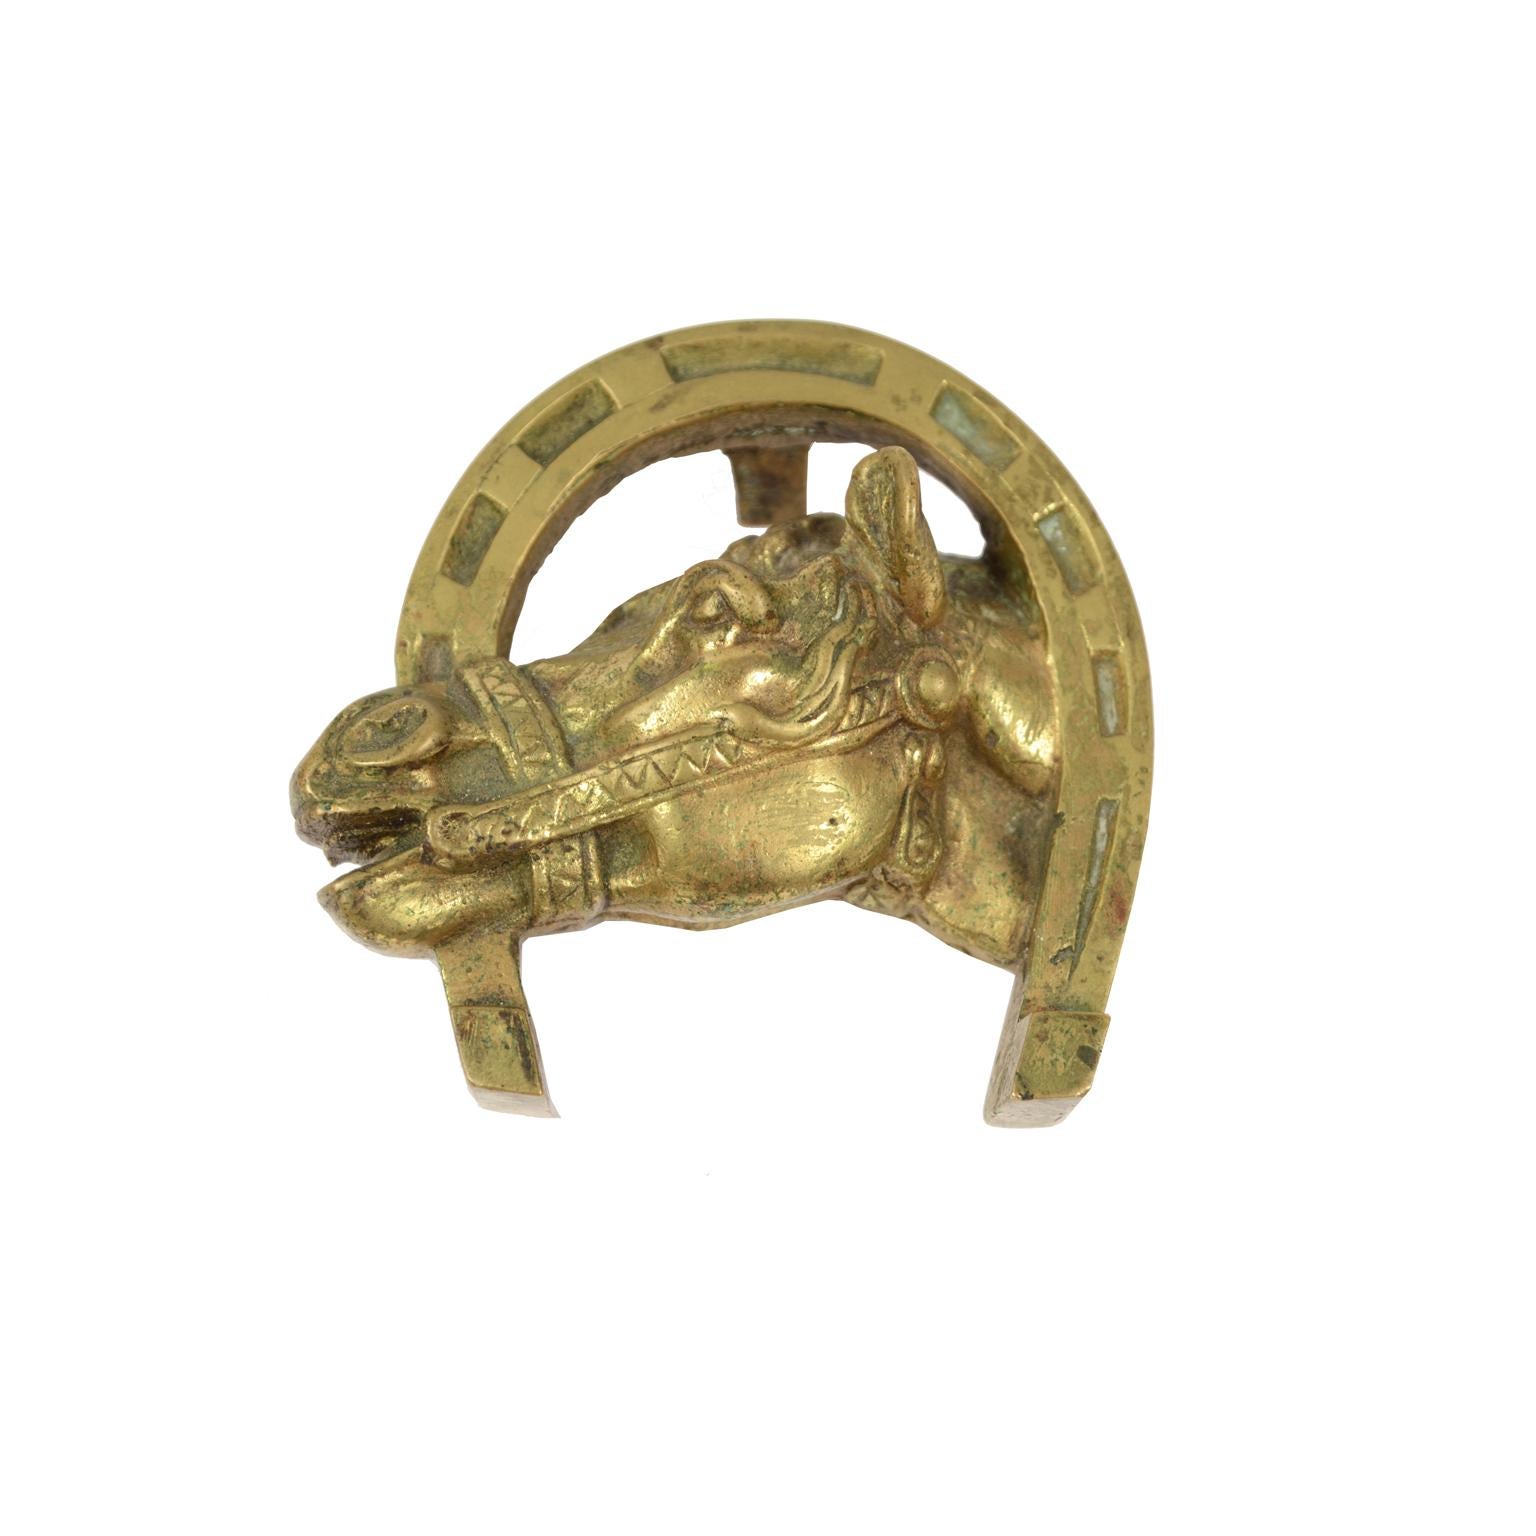 Paperweight made of lost wax casting brass depicting a horse's head, English manufacture of the 1930s. Good condition. Measures: cm 10 x 10 H 5.
Shipping is insured by Lloyd's London; our gift box is free (look at the last picture).
  